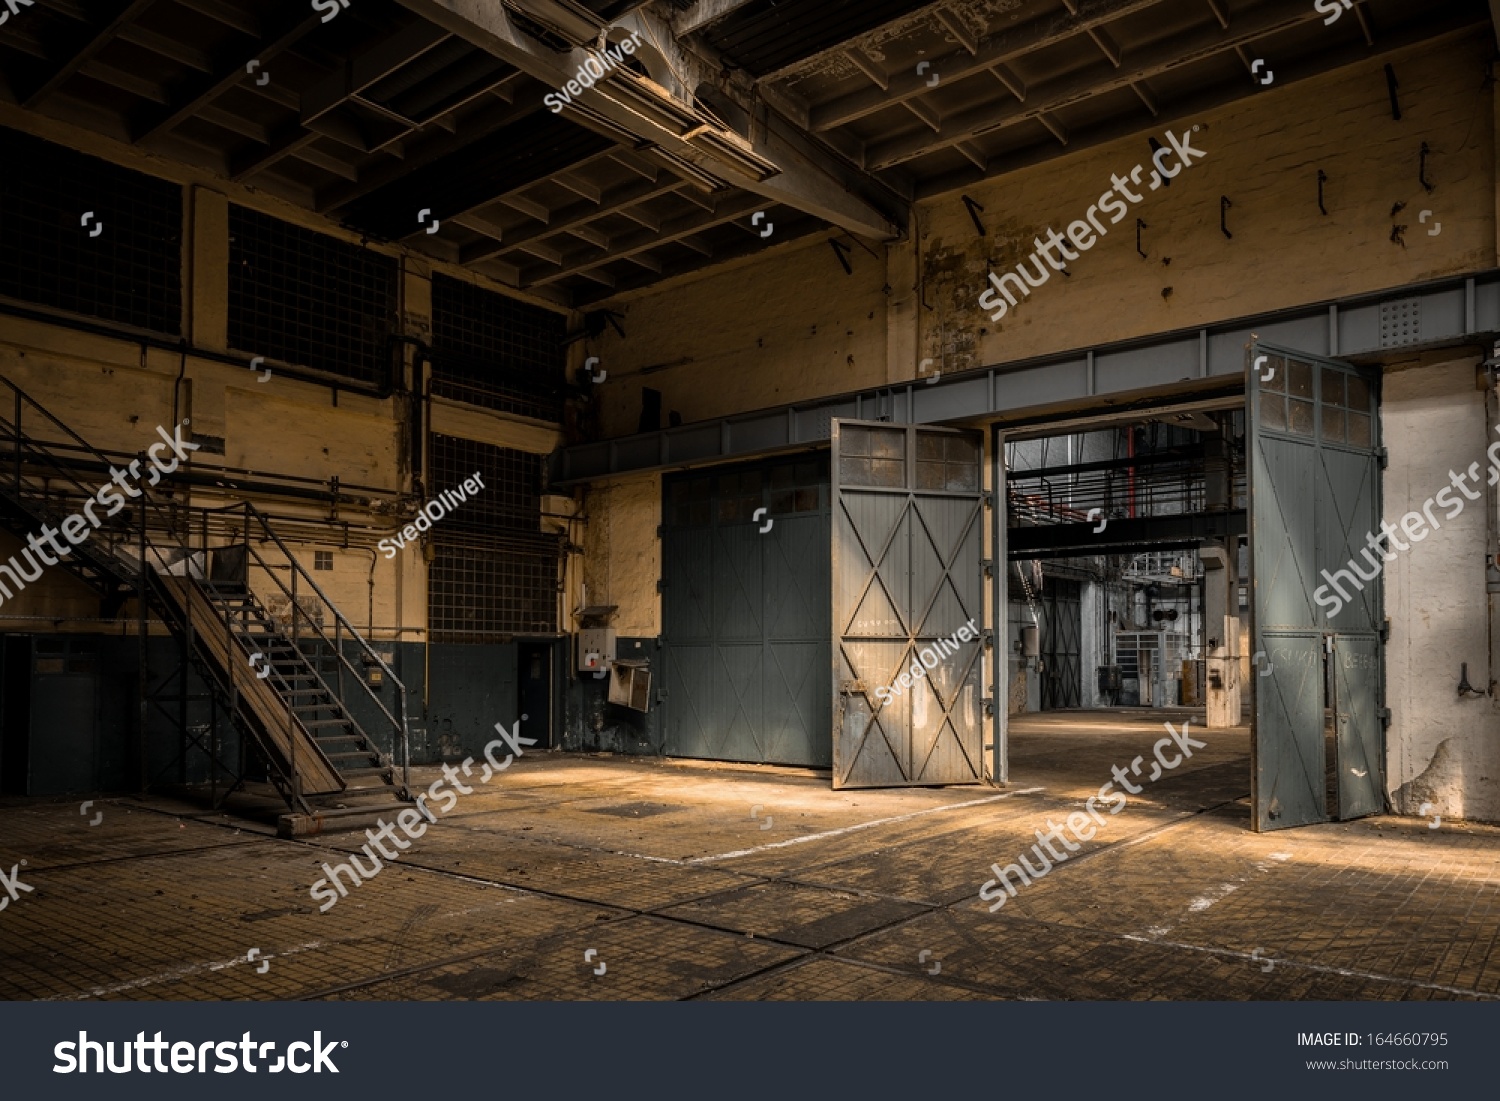 Industrial interior of an old factory #164660795